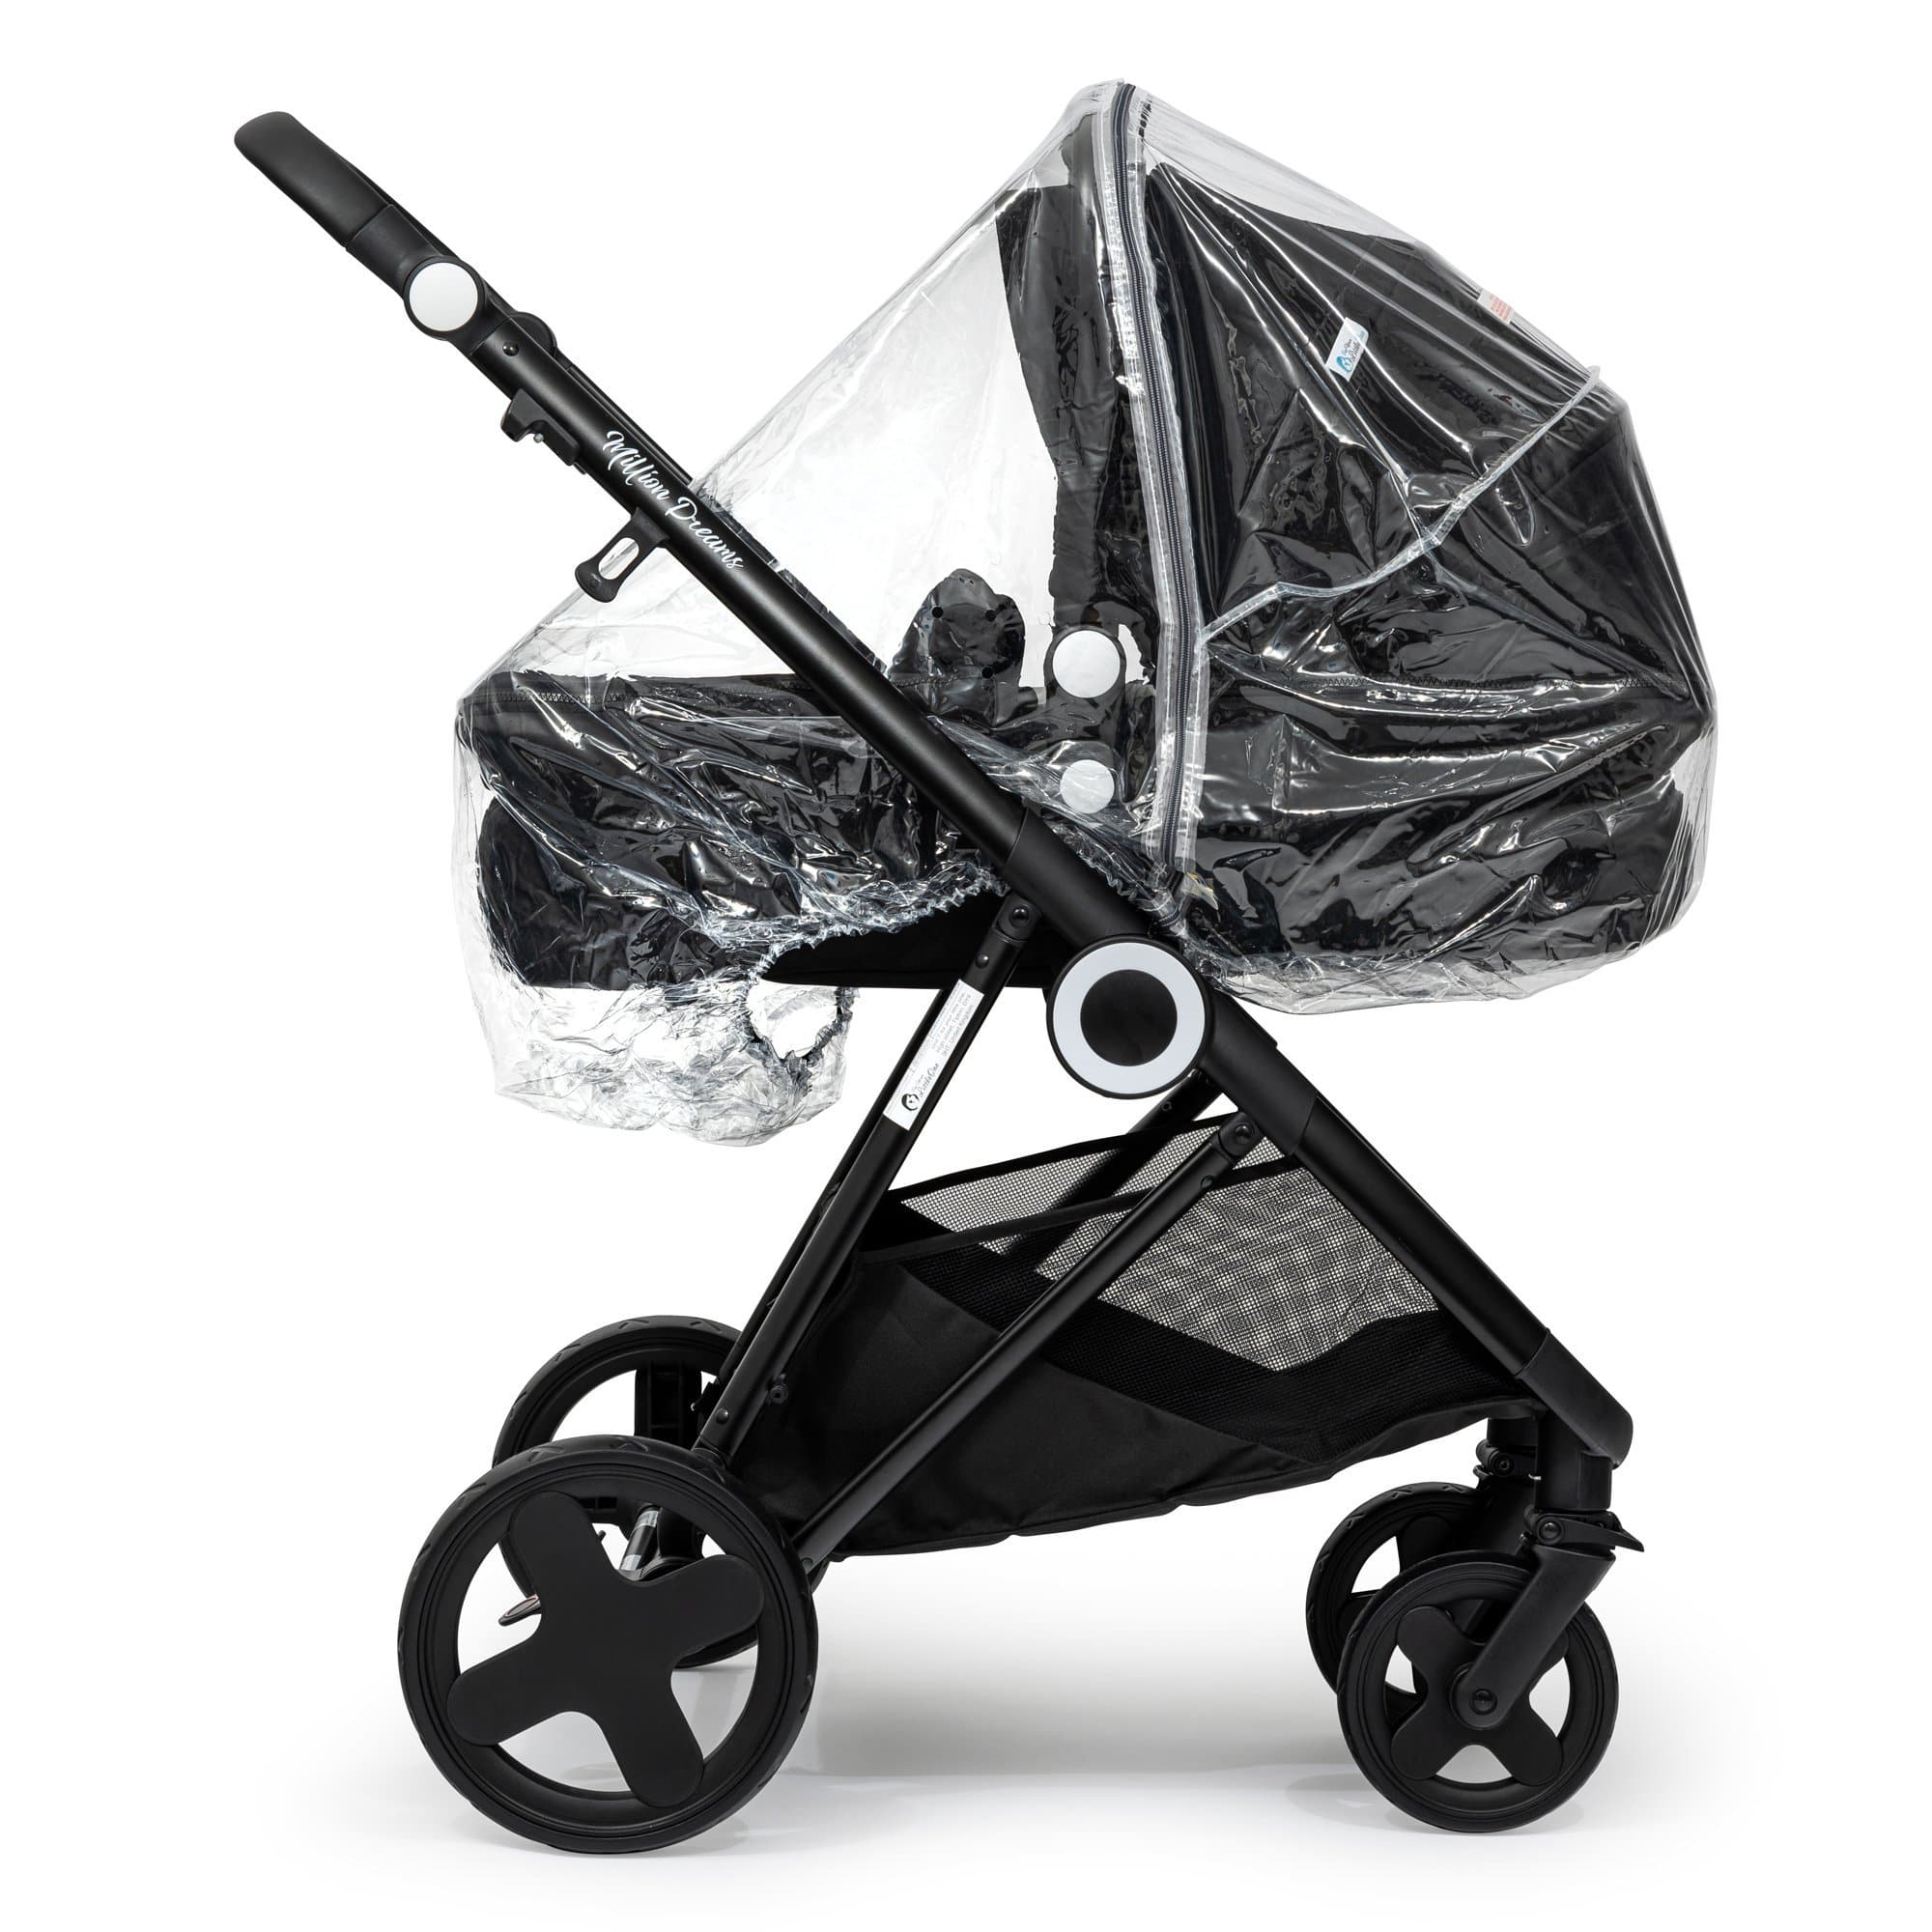 2 in 1 Rain Cover Compatible with Bloom - Fits All Models - For Your Little One